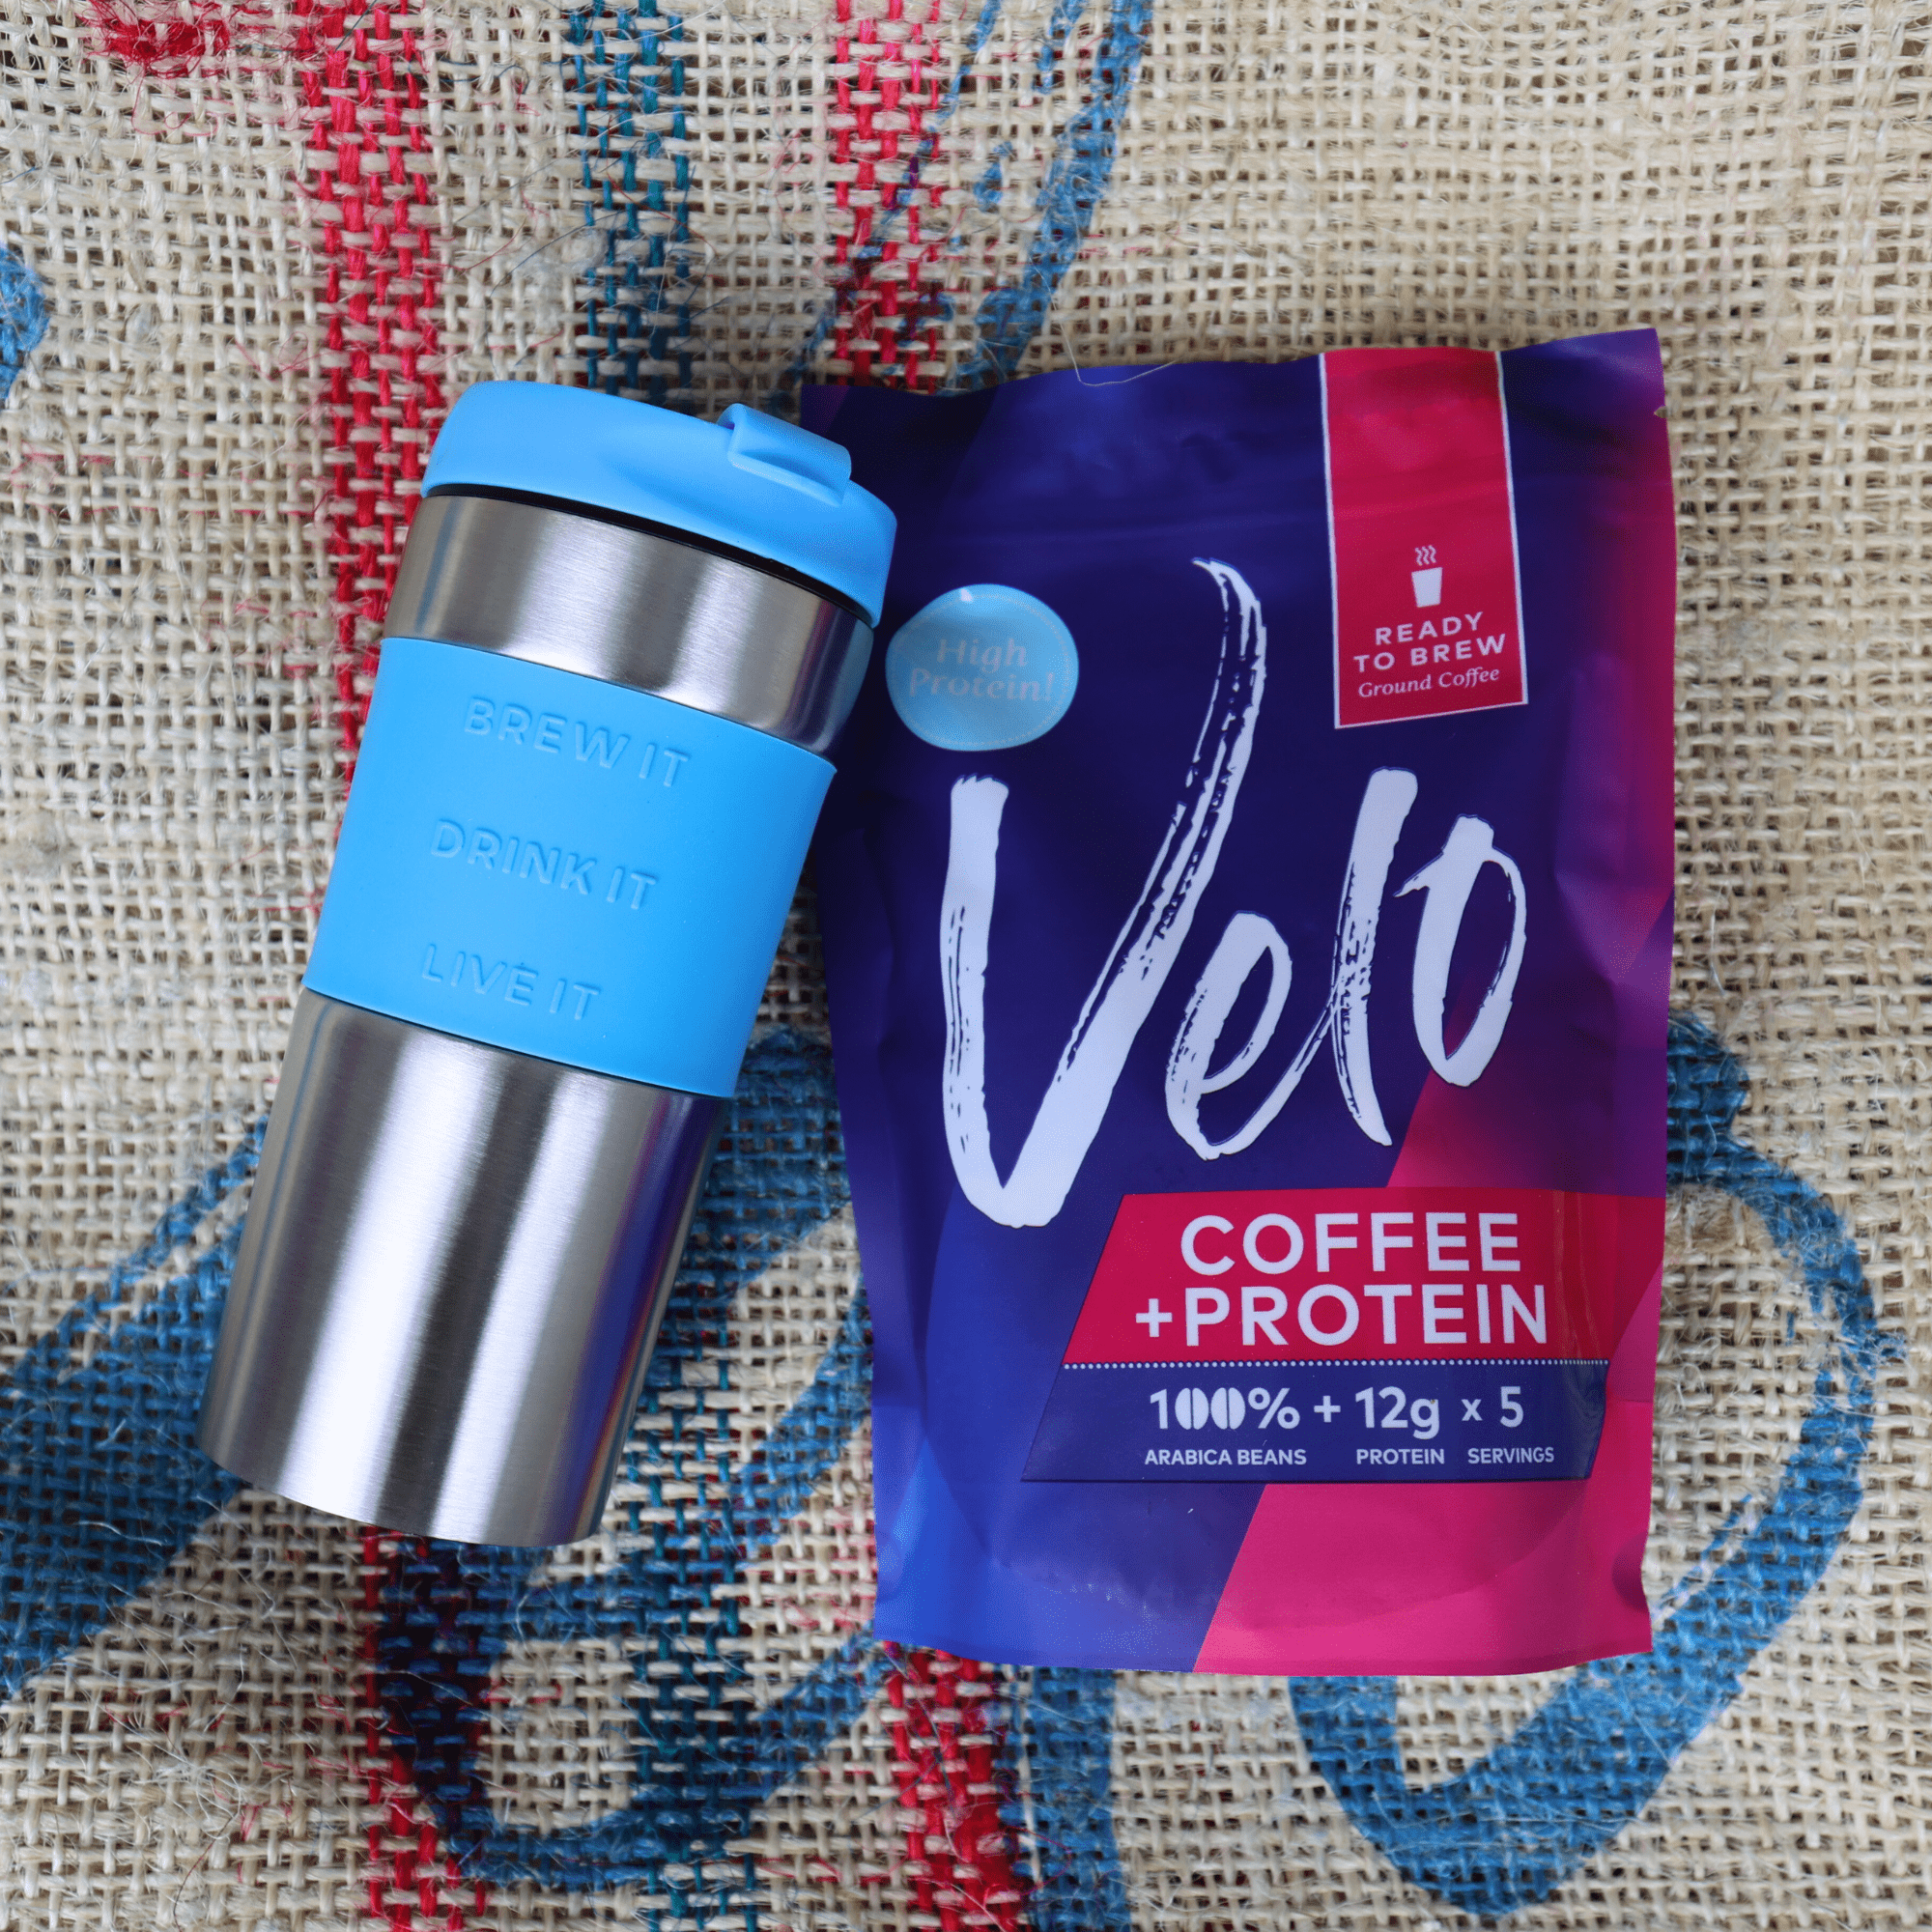 Velo Coffee + Protein and Travel Press Gift Set - Velo Coffee Roasters